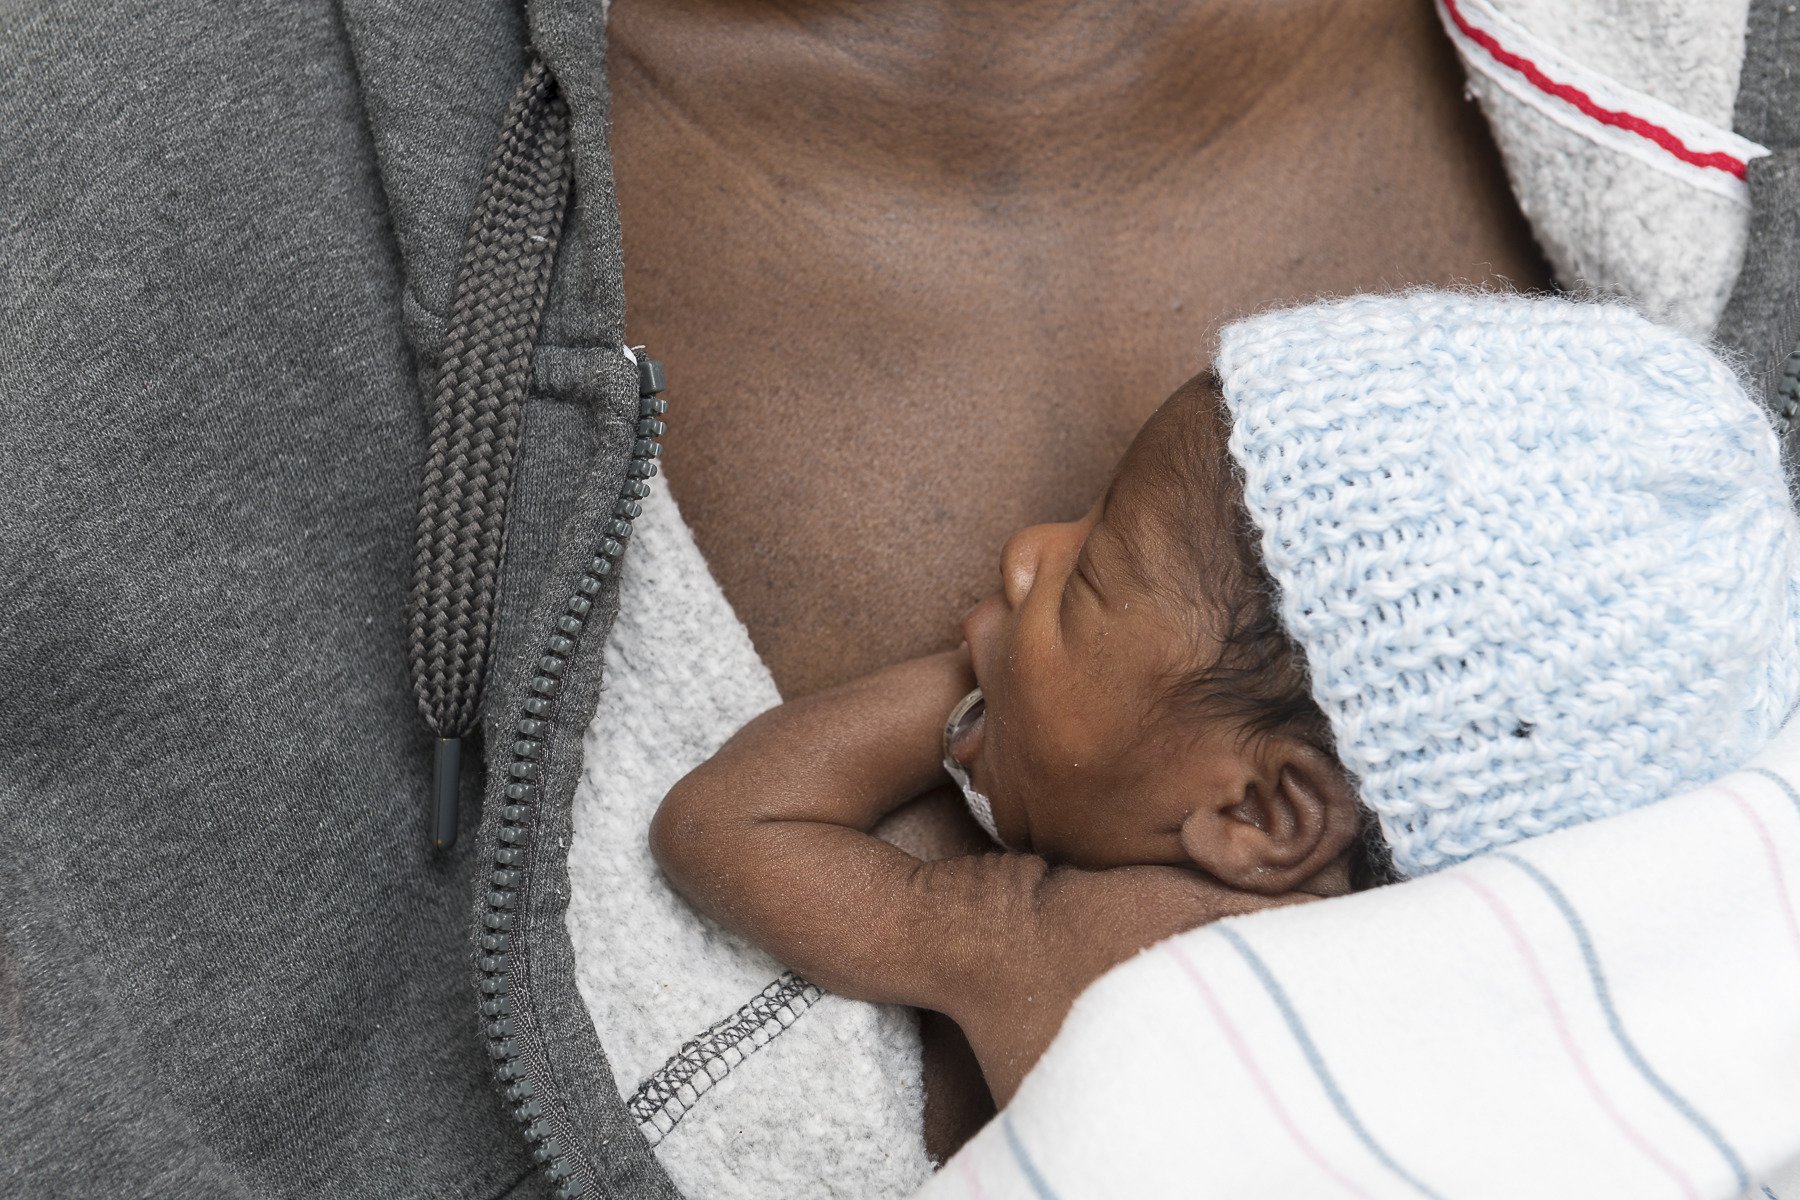 The statement says a 40-person team was involved and the delivery required hours of planning. Ajibola Taiwo, a native of Nigeria, gave birth via cesarean section. (Courtesy Allen Jones, University Marketing)